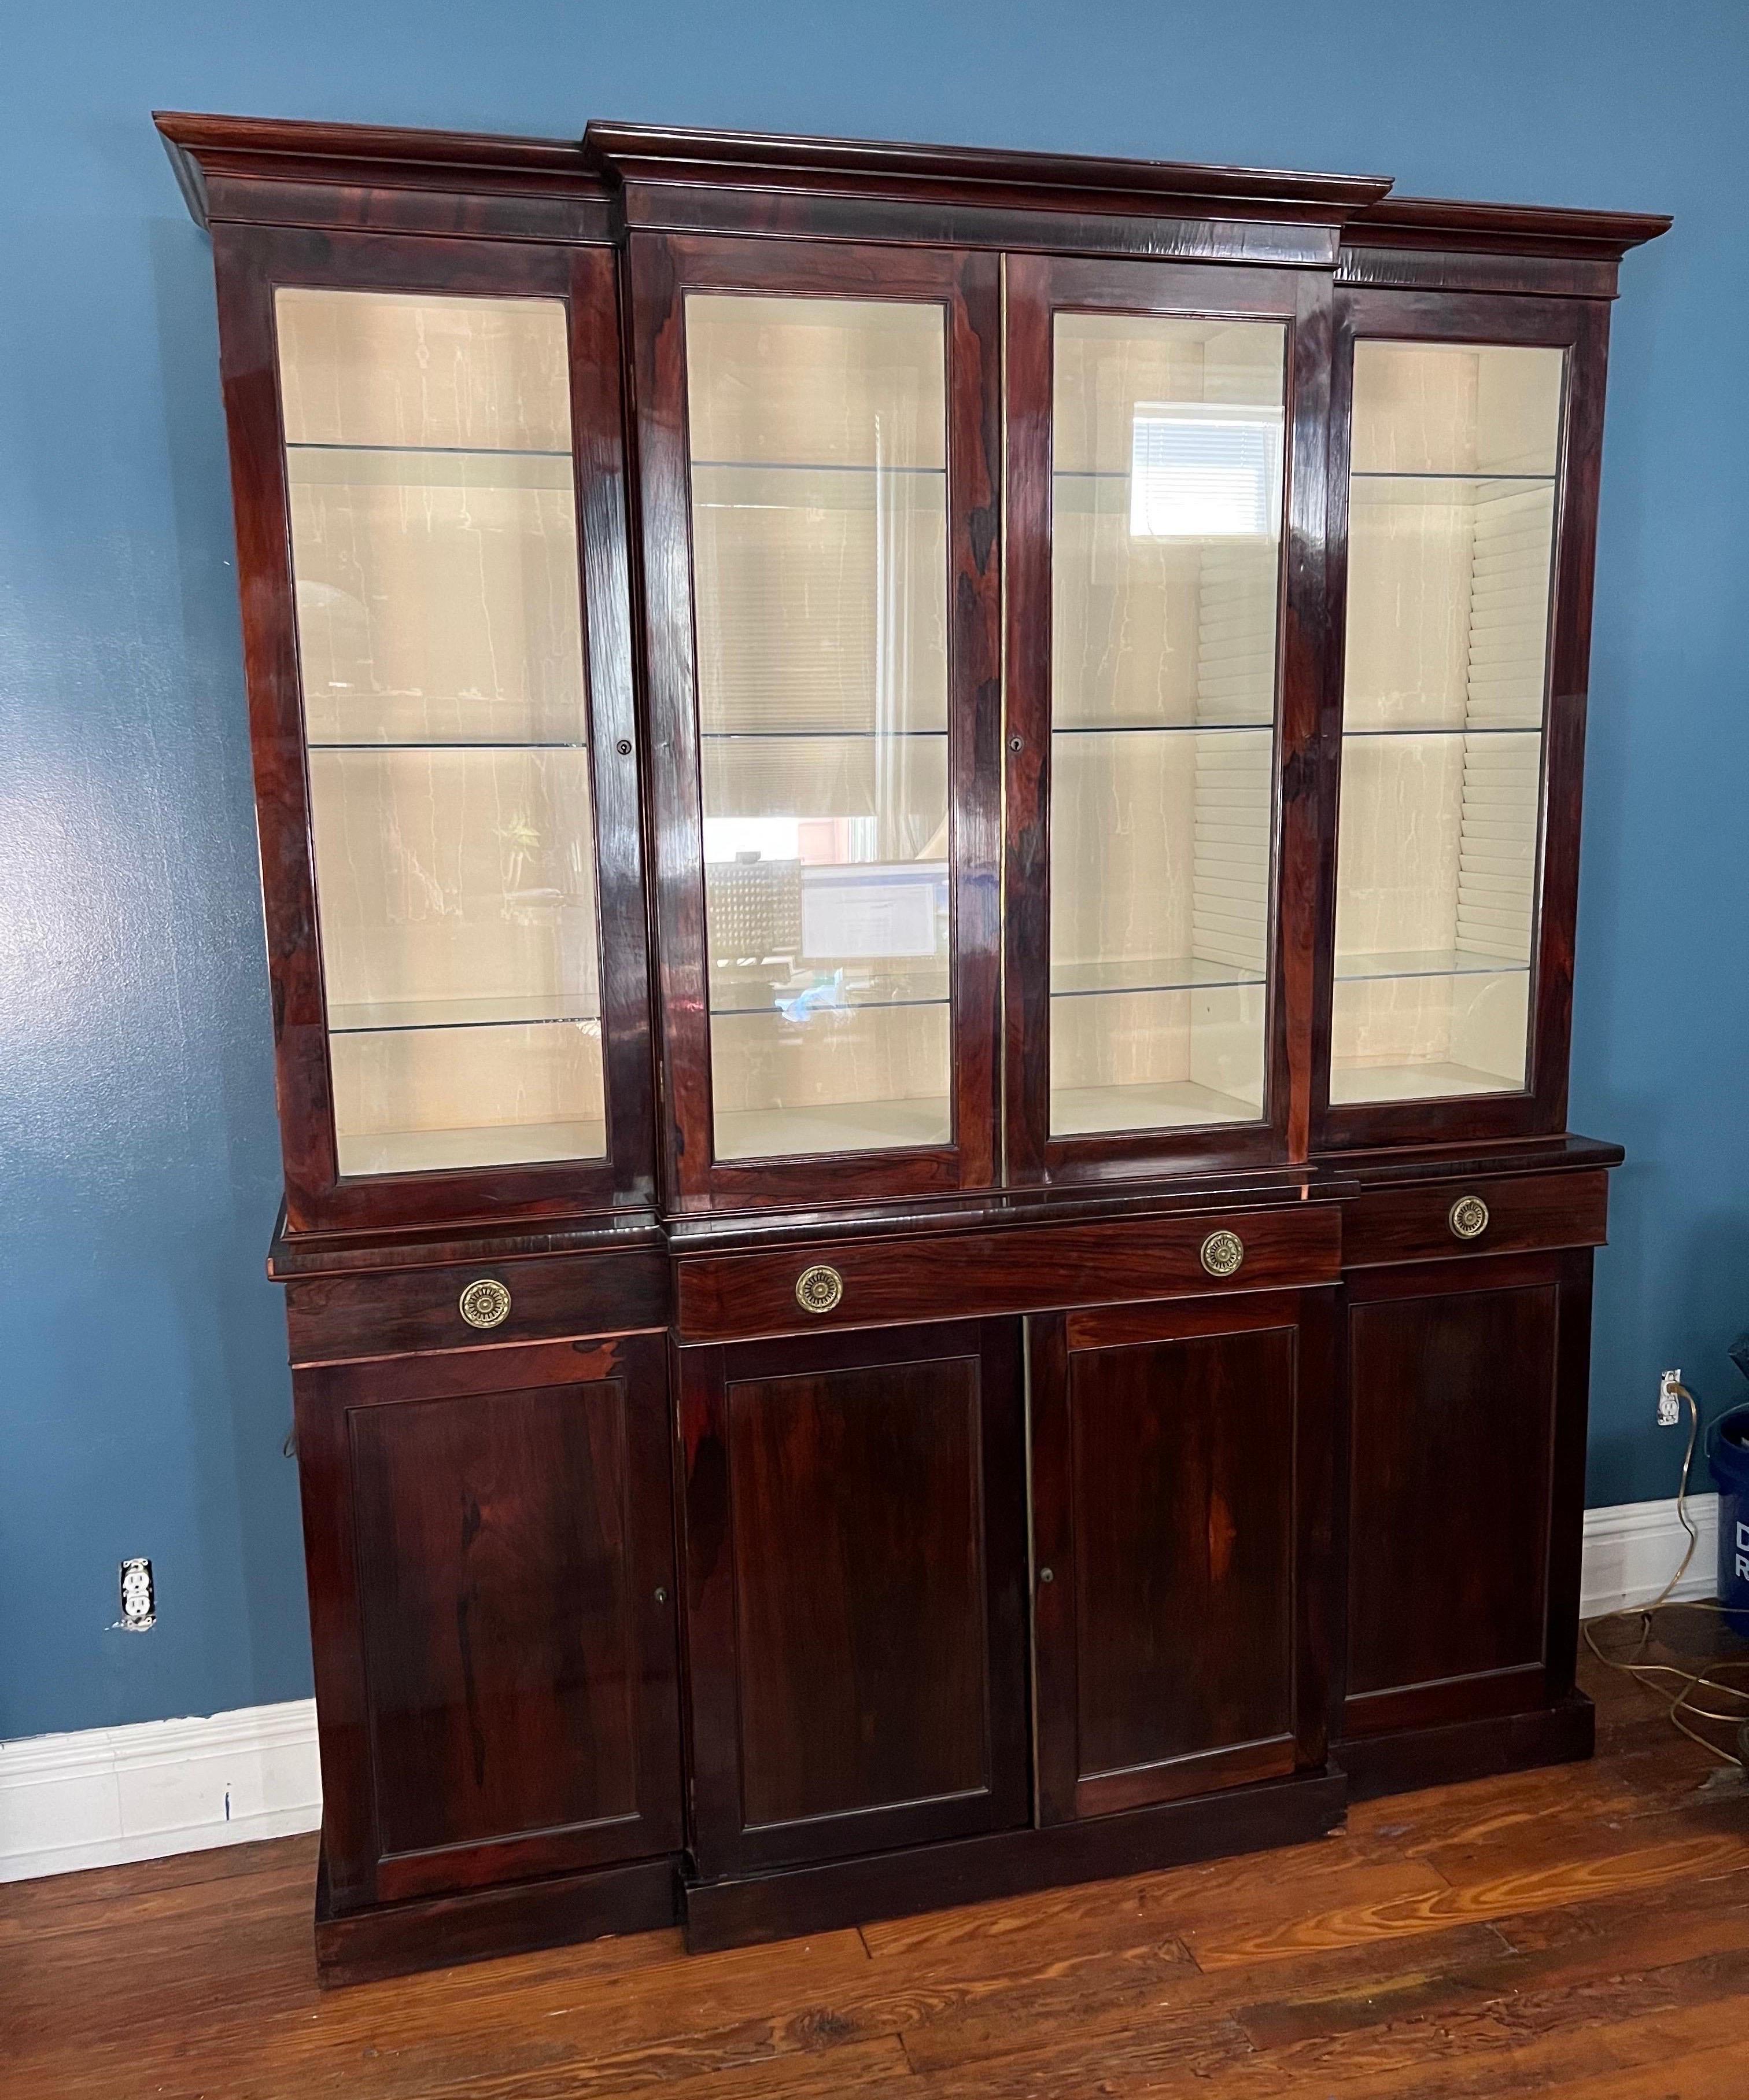 19th Century English Rosewood Breakfront Bookcase with Hidden Drawers In Good Condition For Sale In Charleston, SC